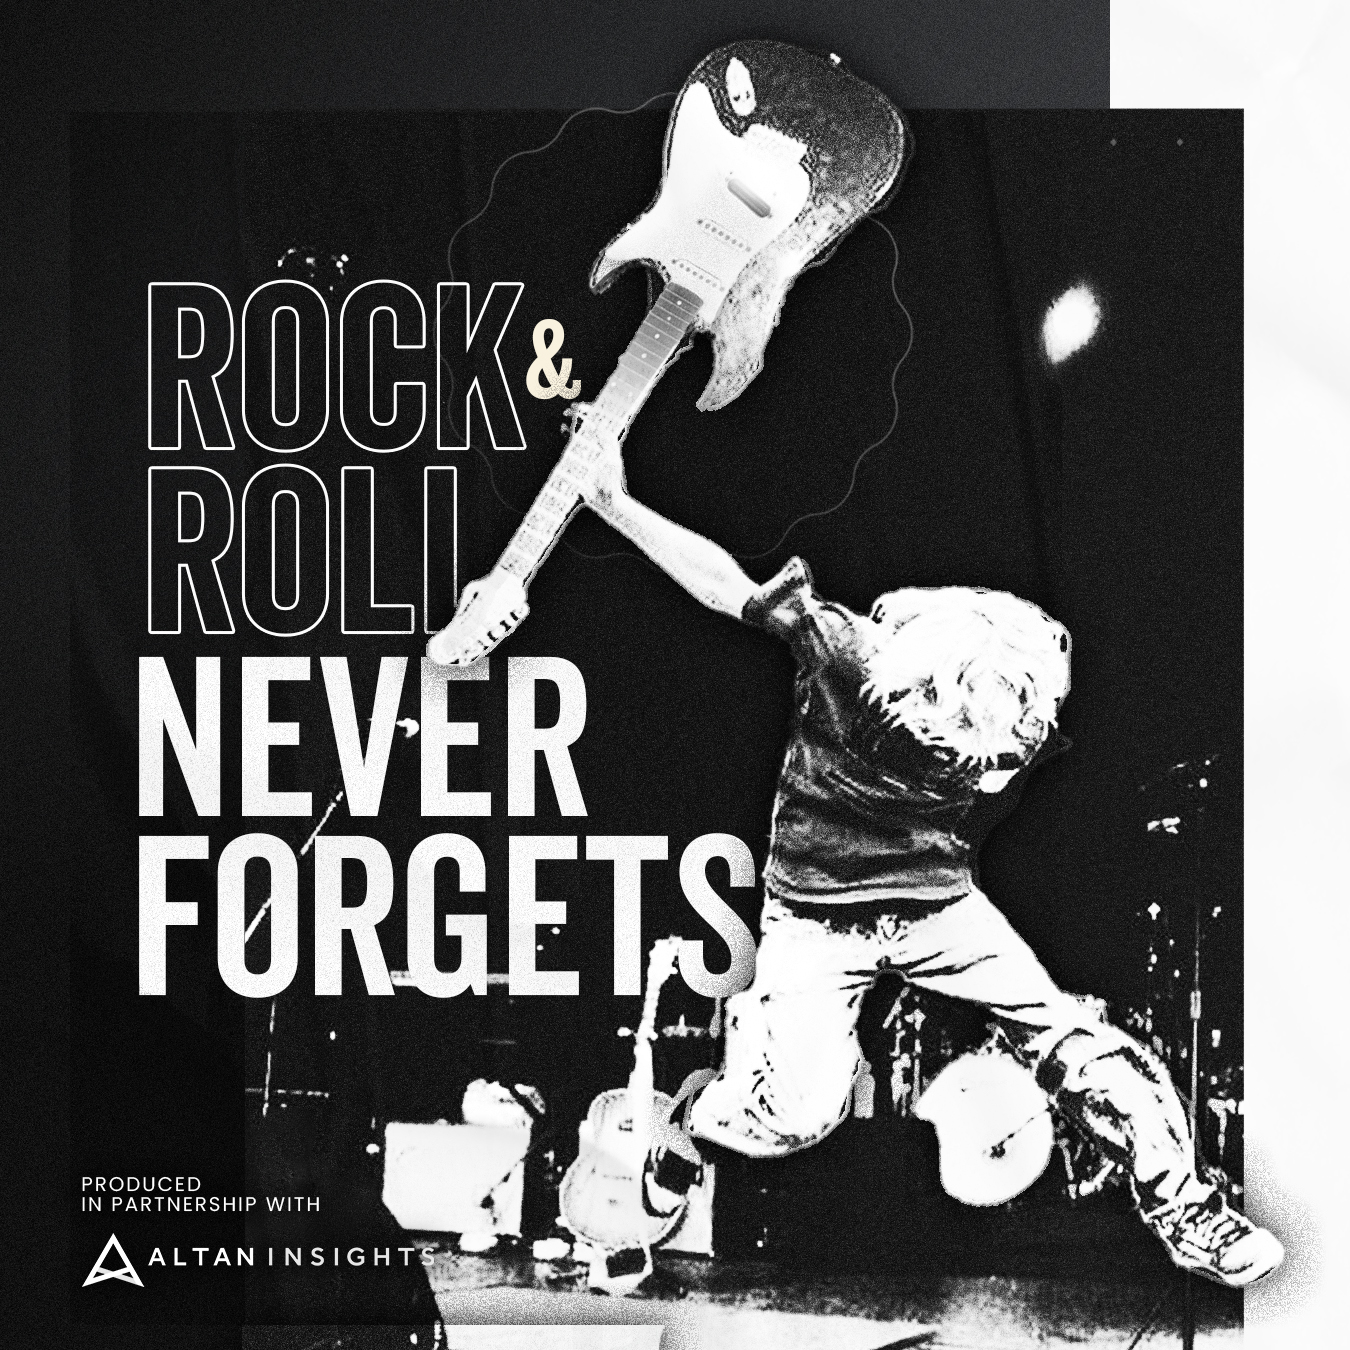 Rock and Roll never forgets